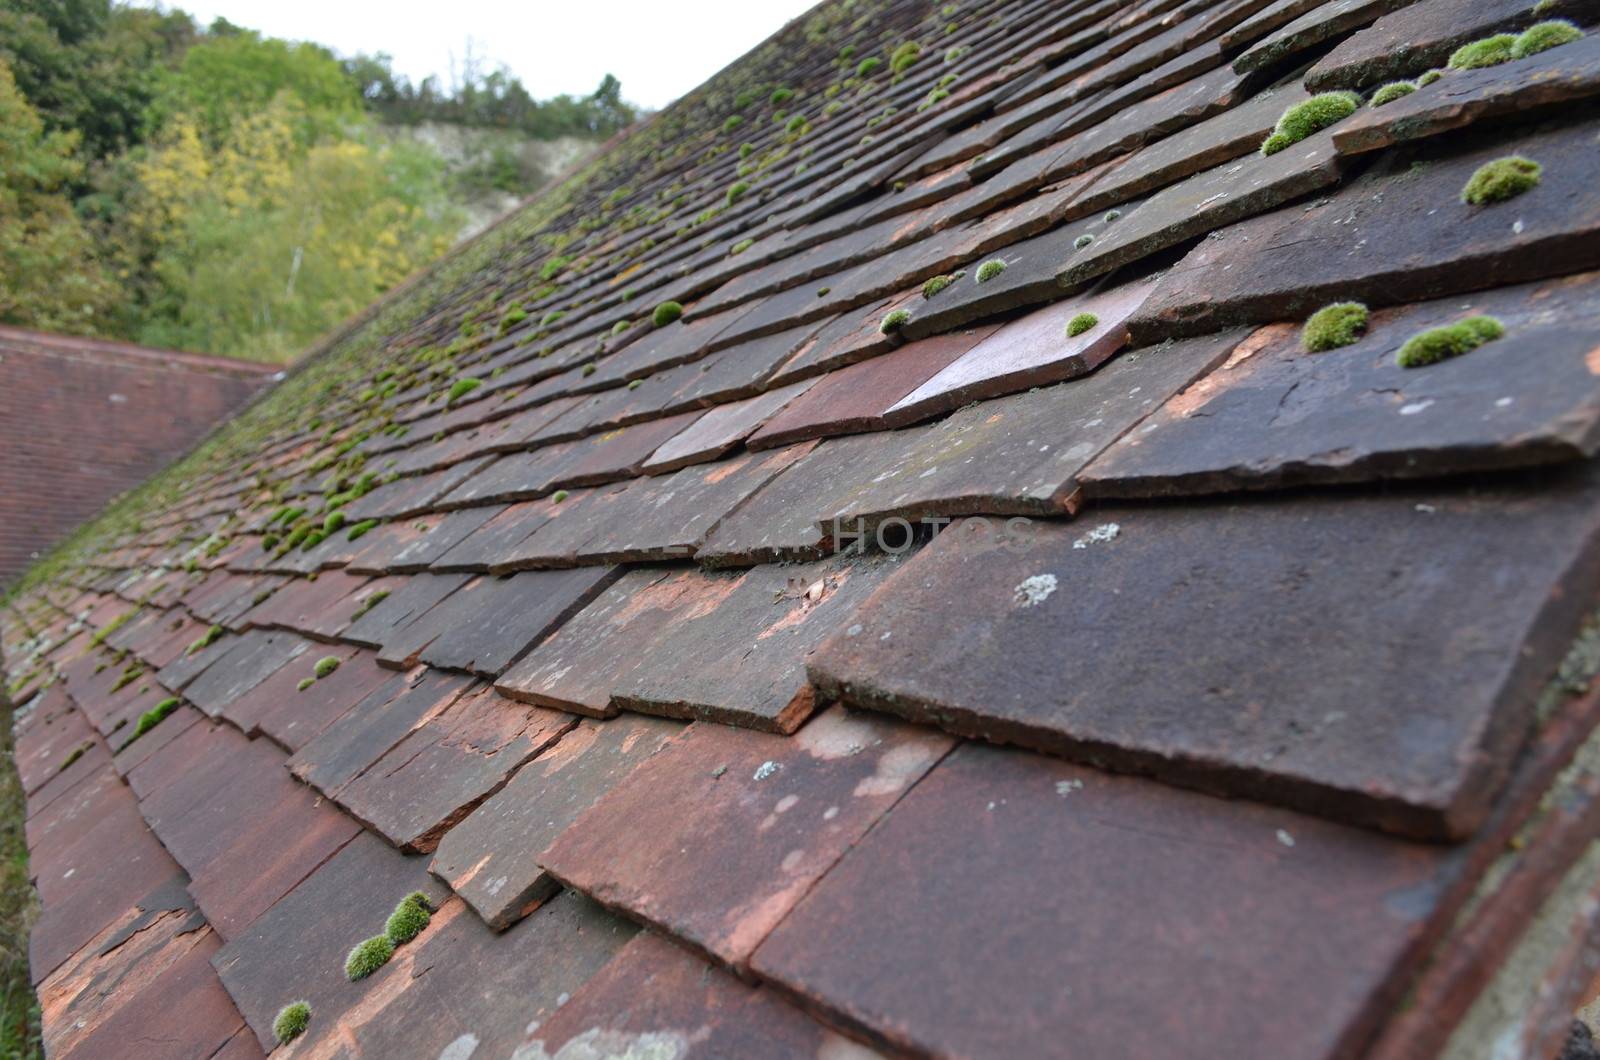 Roofing clay tiles. by bunsview